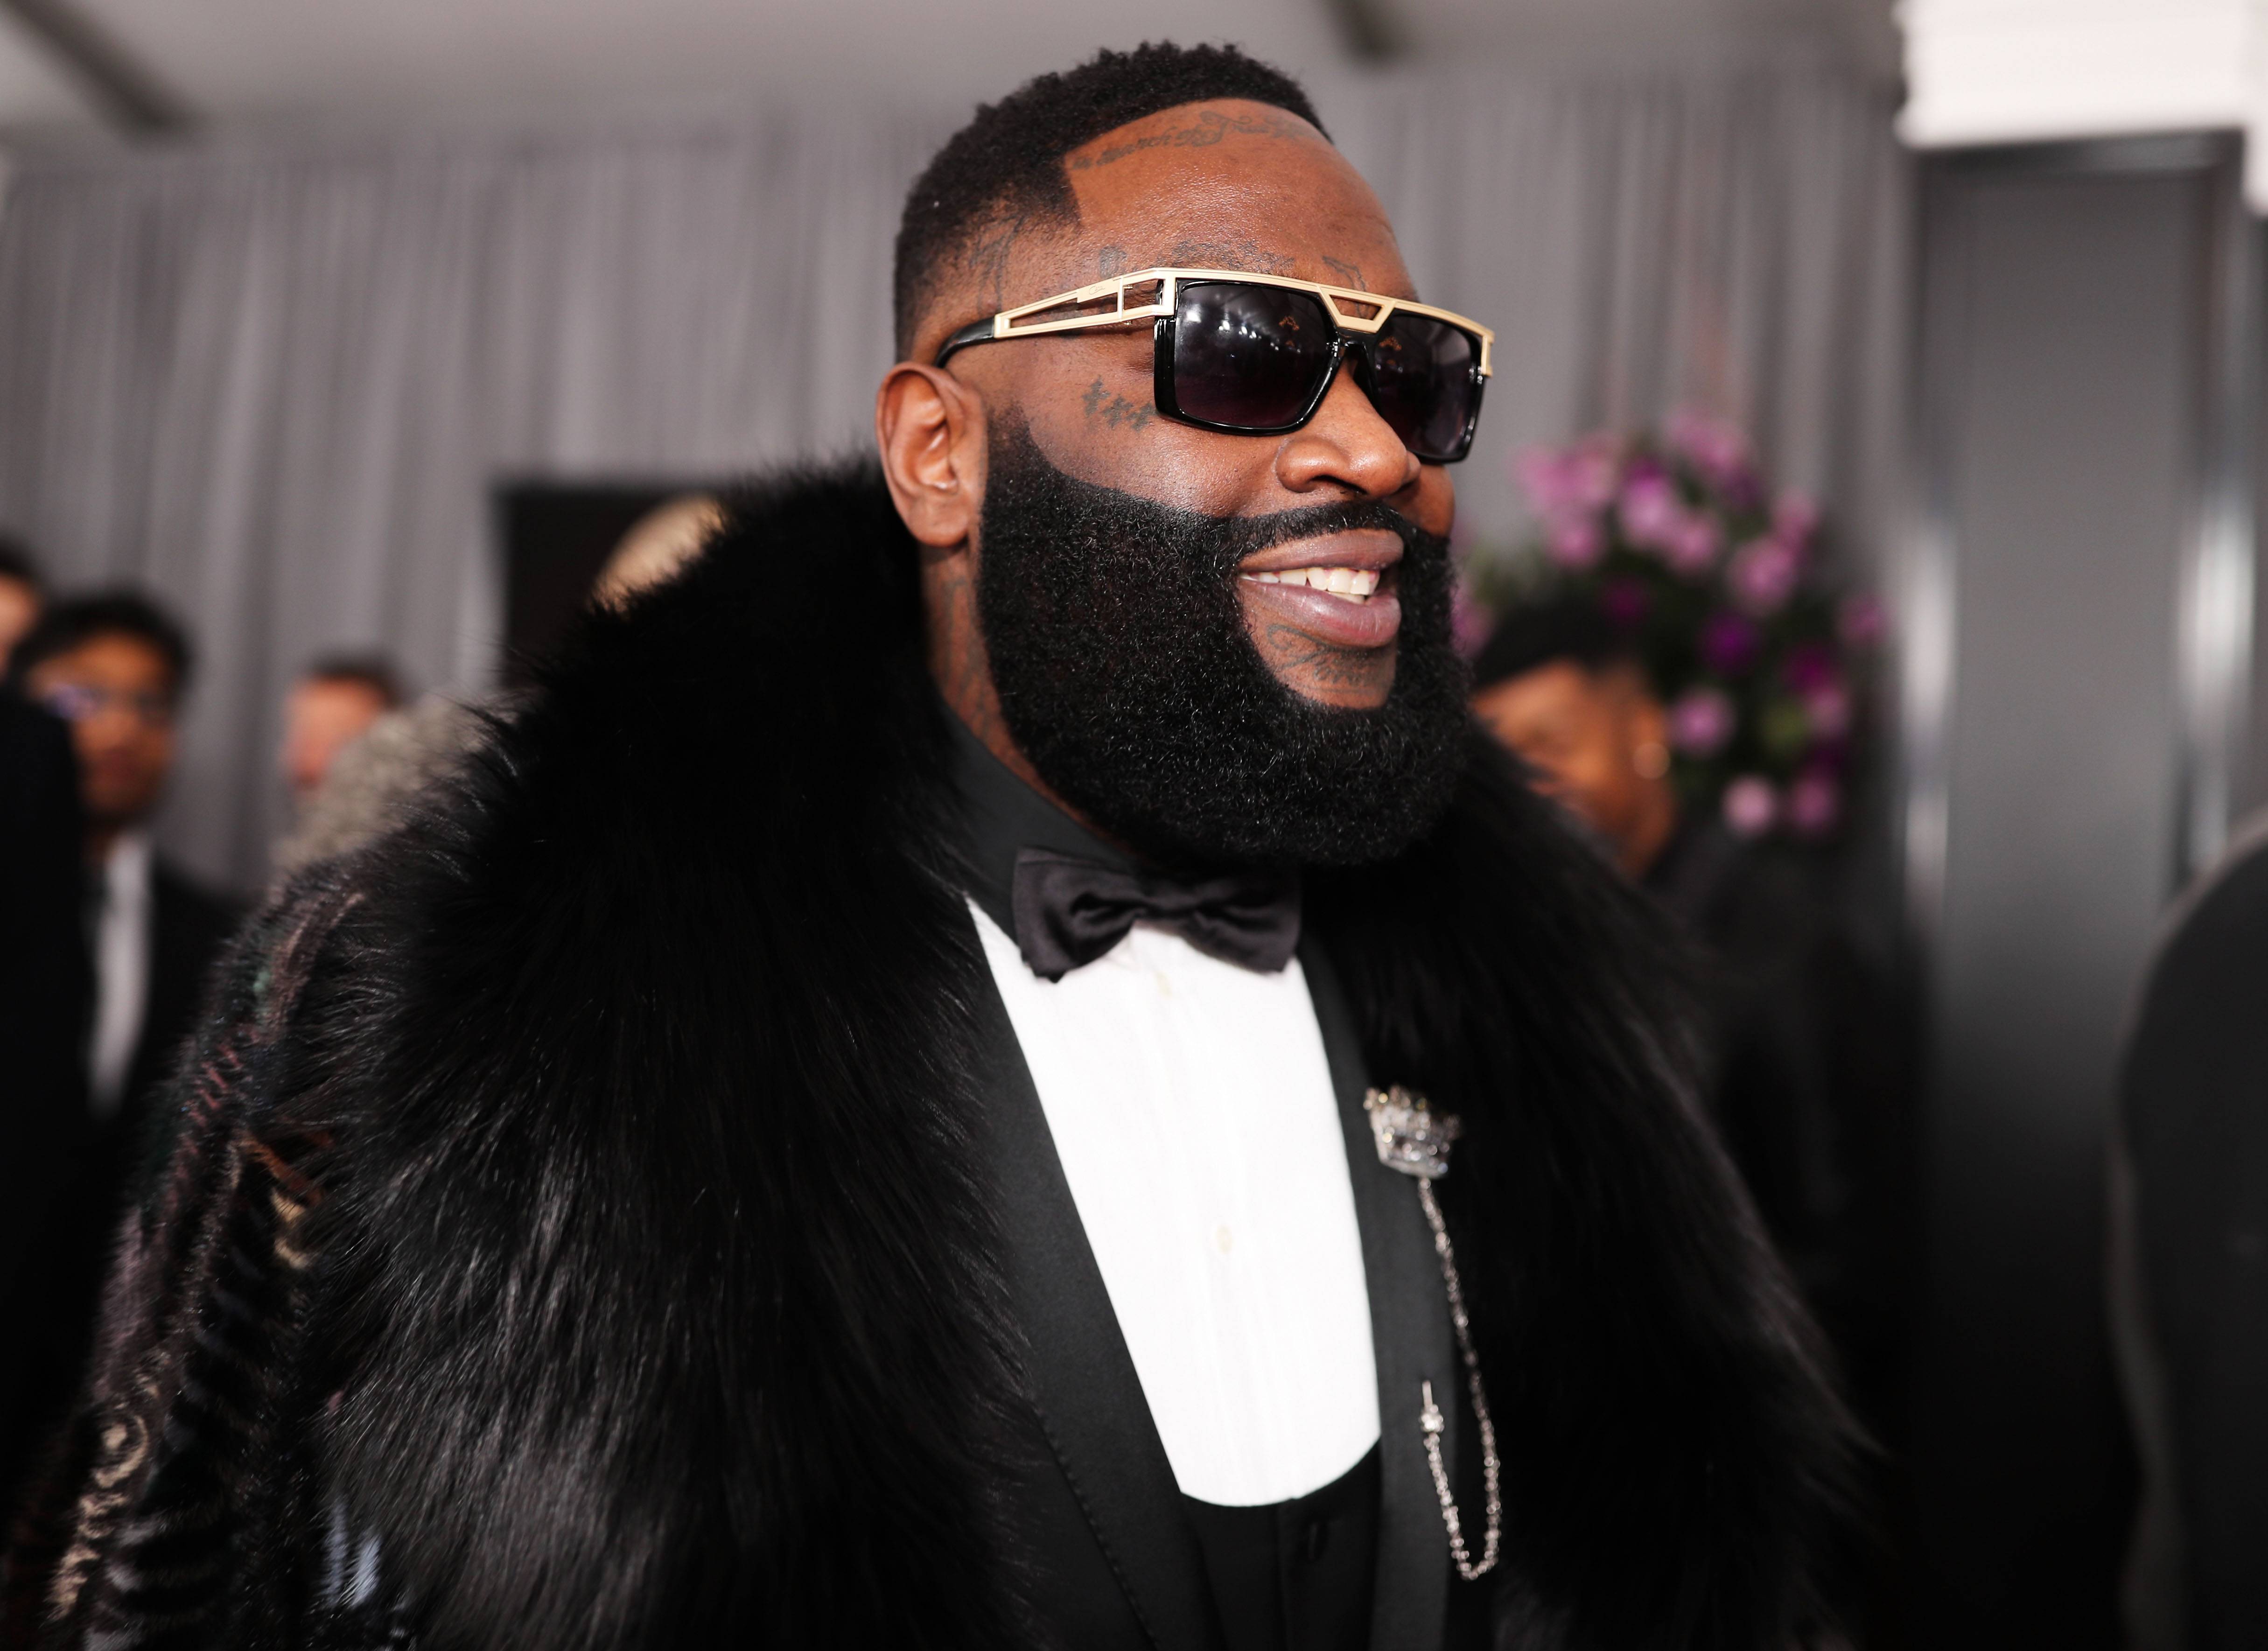 NEW YORK, NY - JANUARY 28:  Recording artist Rick Ross attends the 60th Annual GRAMMY Awards at Madison Square Garden on January 28, 2018 in New York City.  (Photo by Christopher Polk/Getty Images for NARAS)